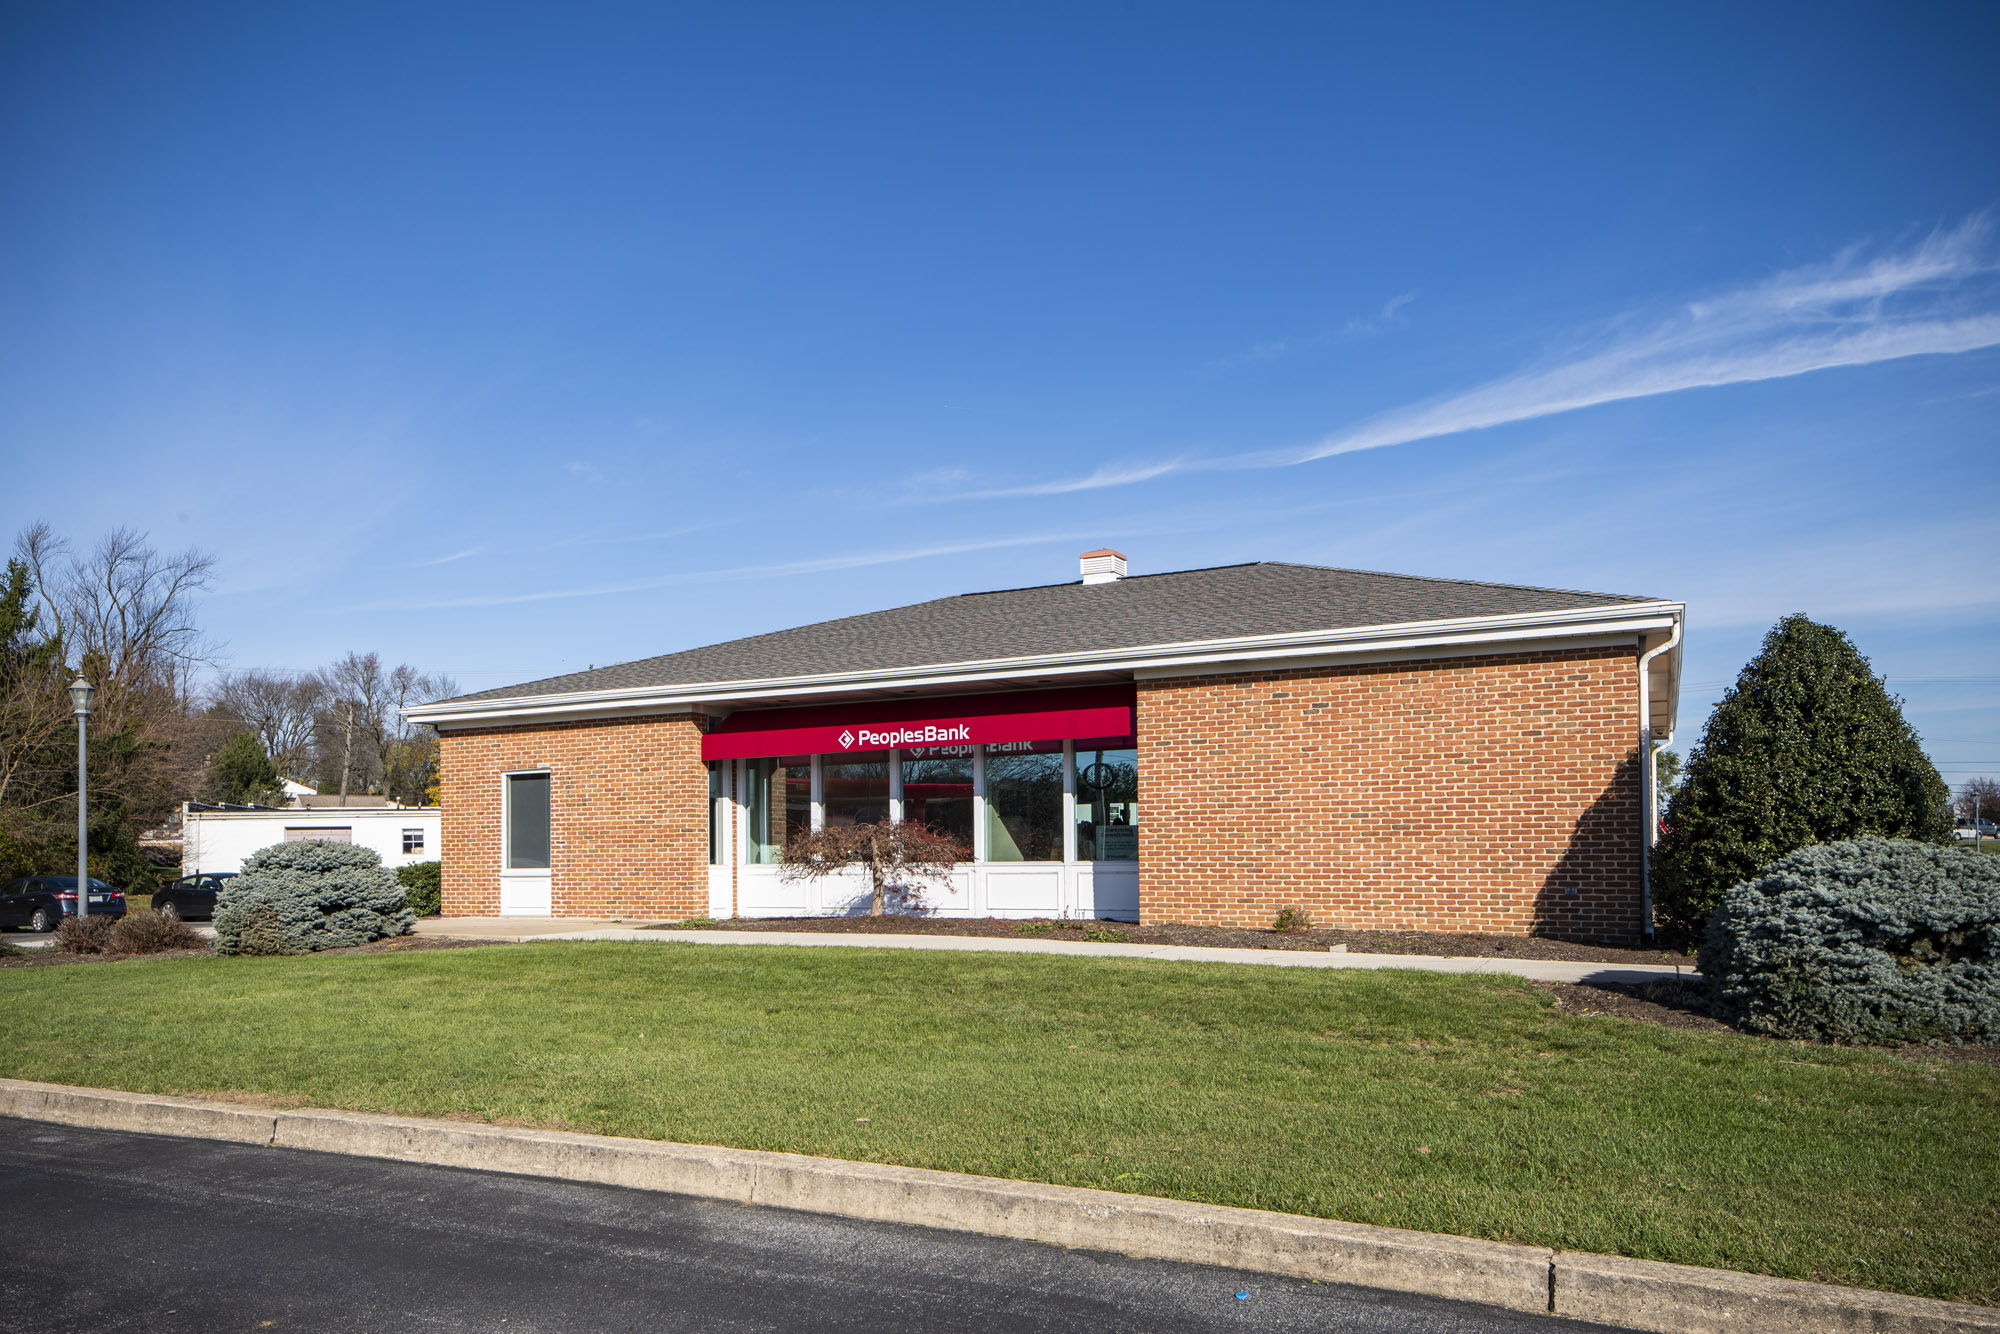 West York: West York Connections Center Details

1477 Carlisle Road
York, PA 17408